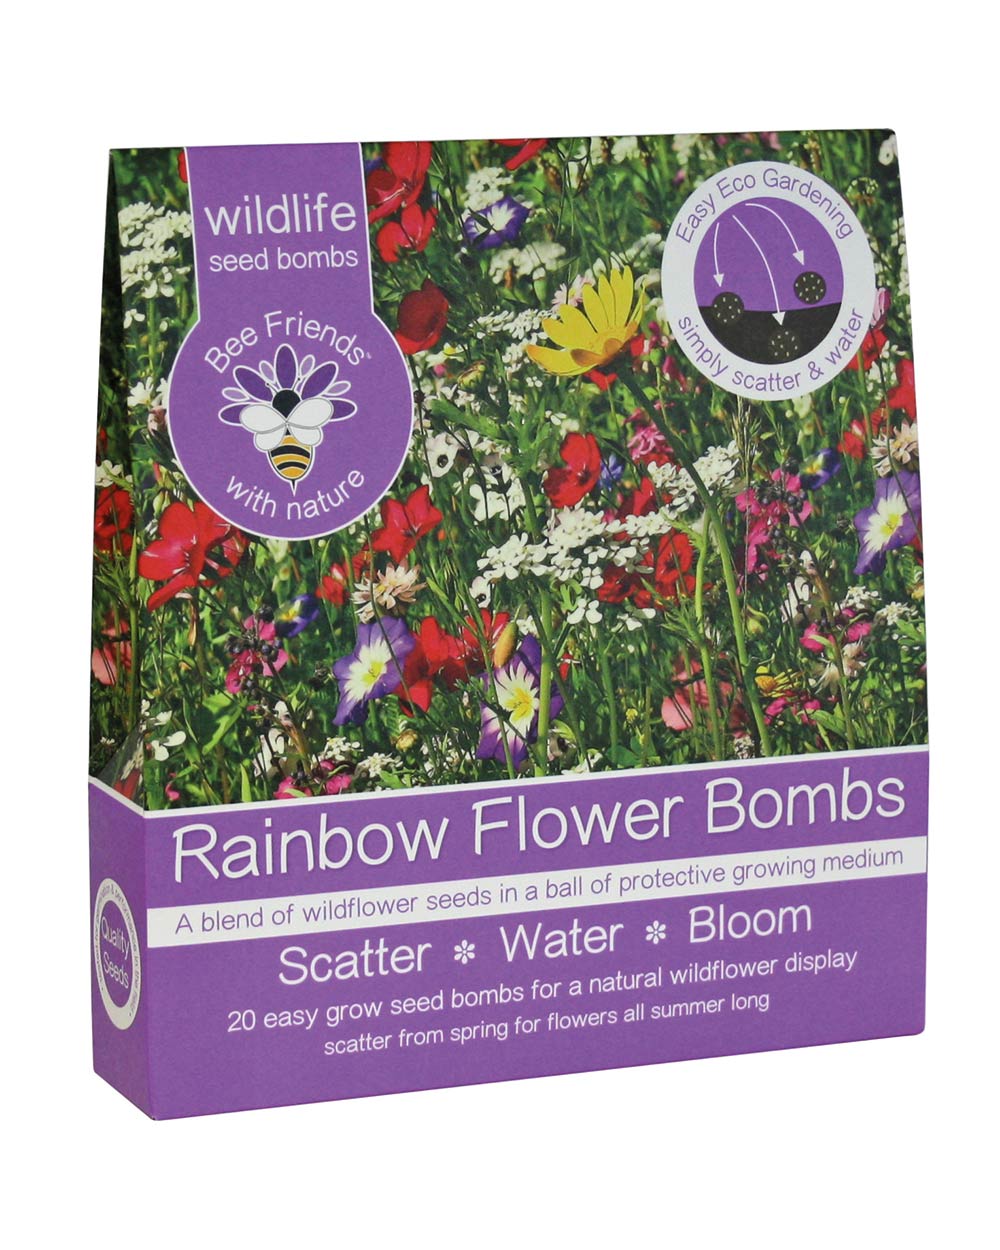 Rainbow Flower Seed Bombs Bees 20 Pack featured in a box on a white backround